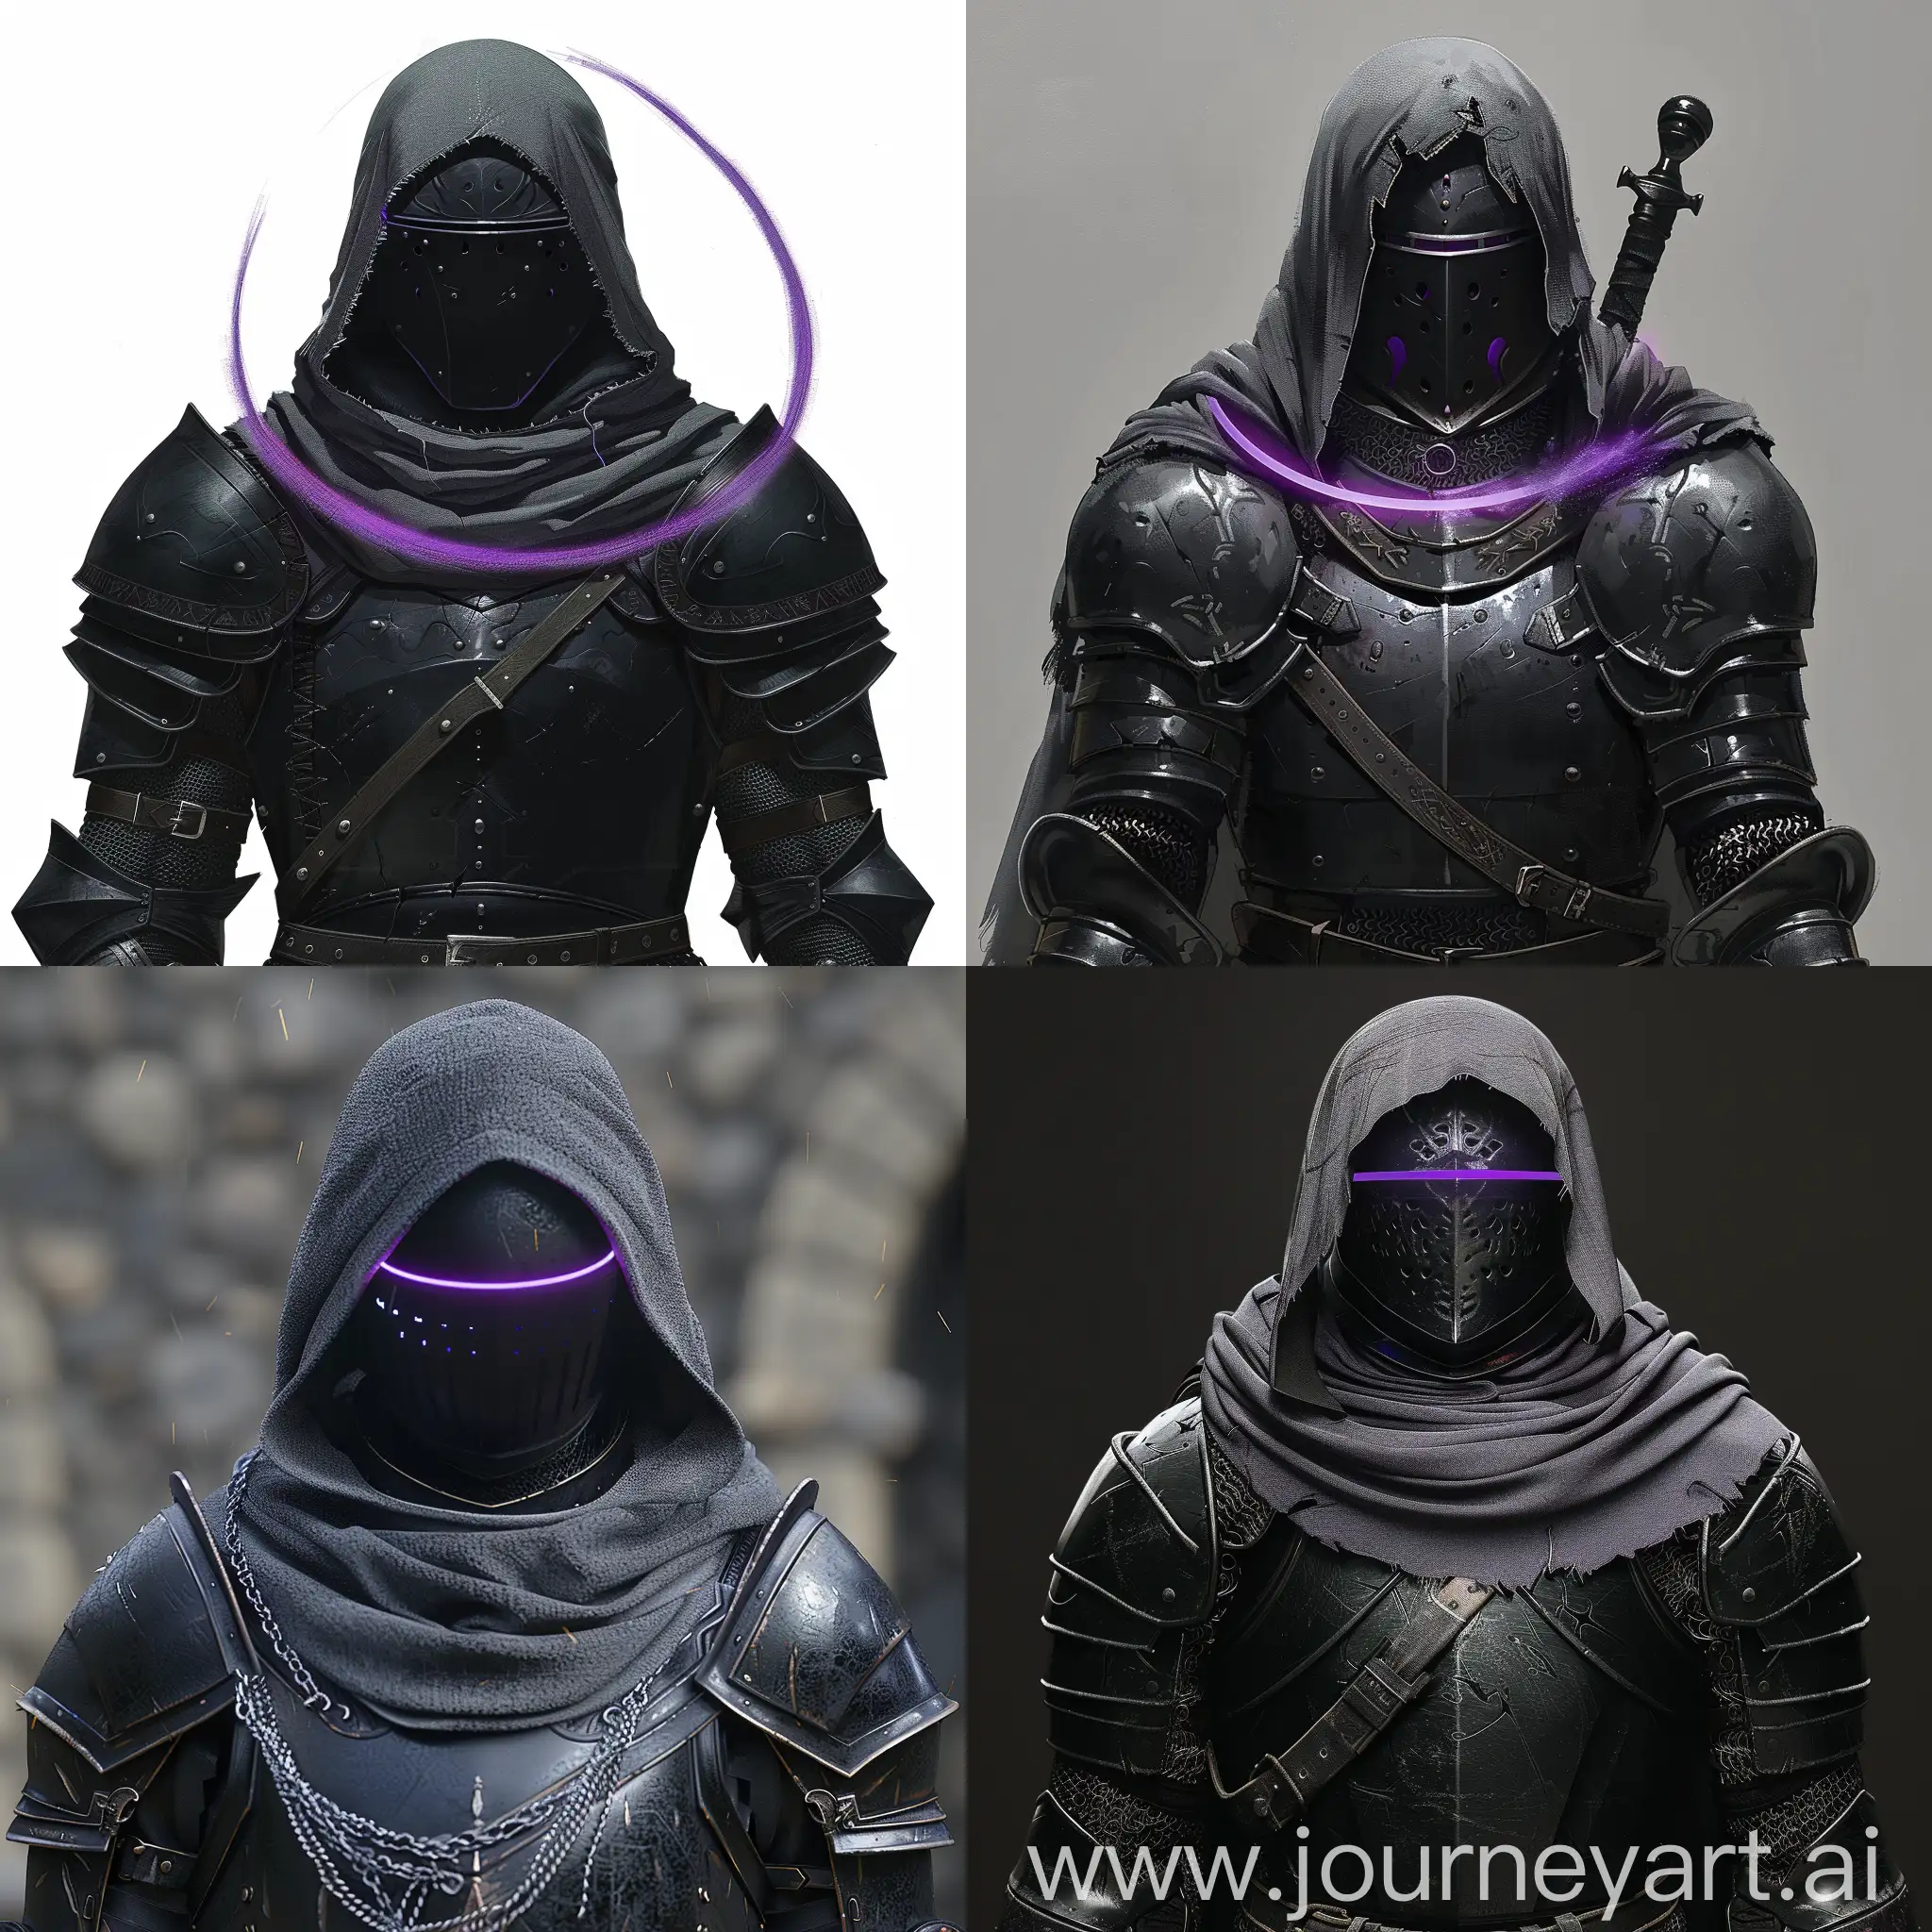 Mystical-Armored-Knight-in-Black-Armor-with-Purple-Aura